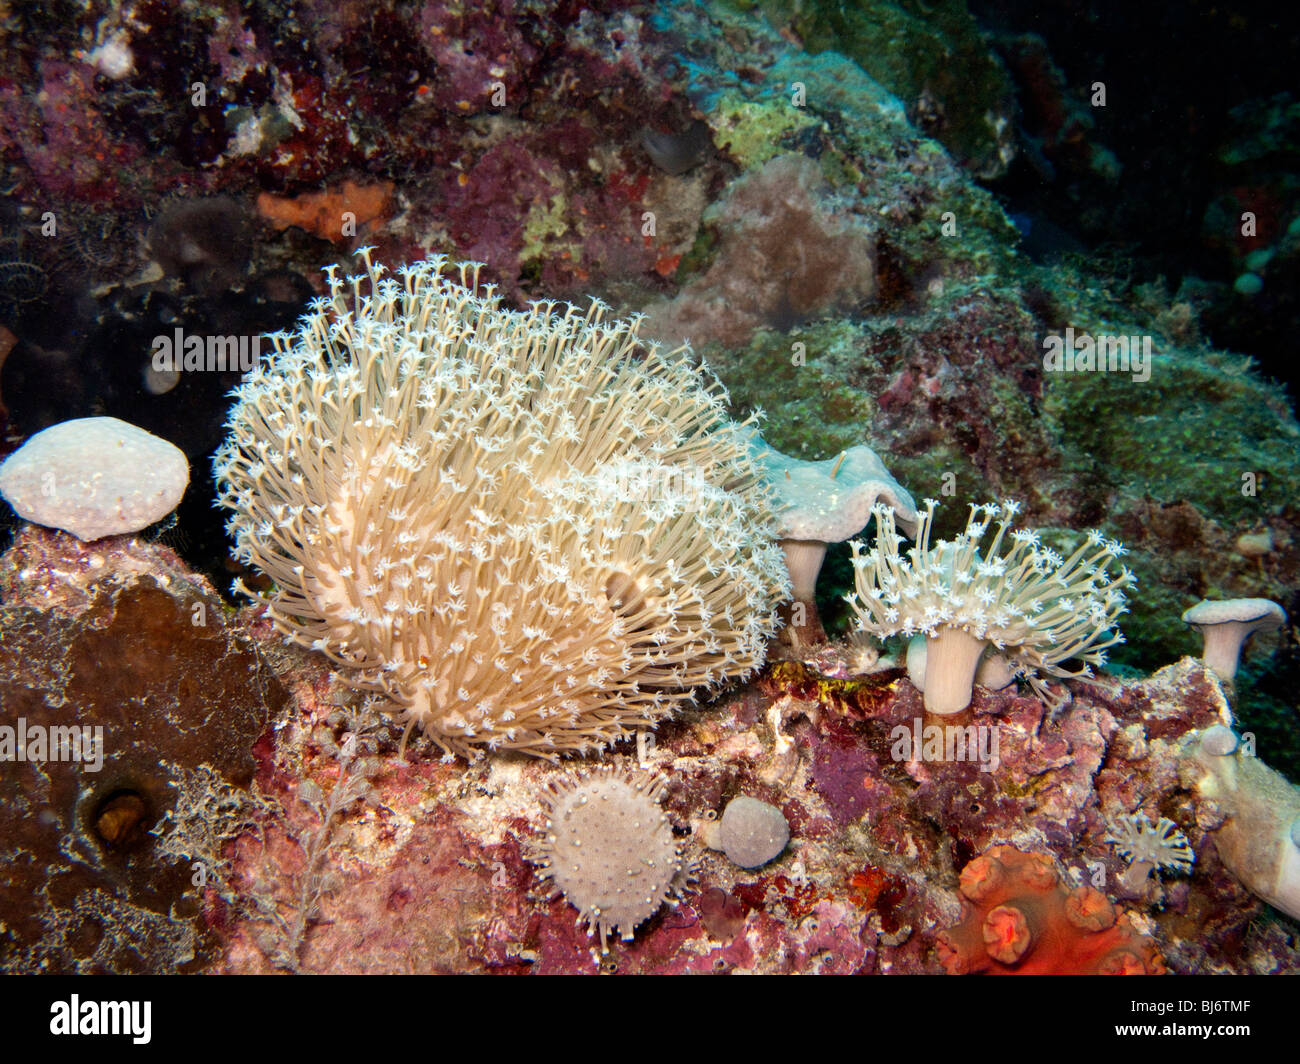 Indonesia, Sulawesi, Wakatobi National Park, flower soft corals Xenia sp on colourful coral reef Stock Photo